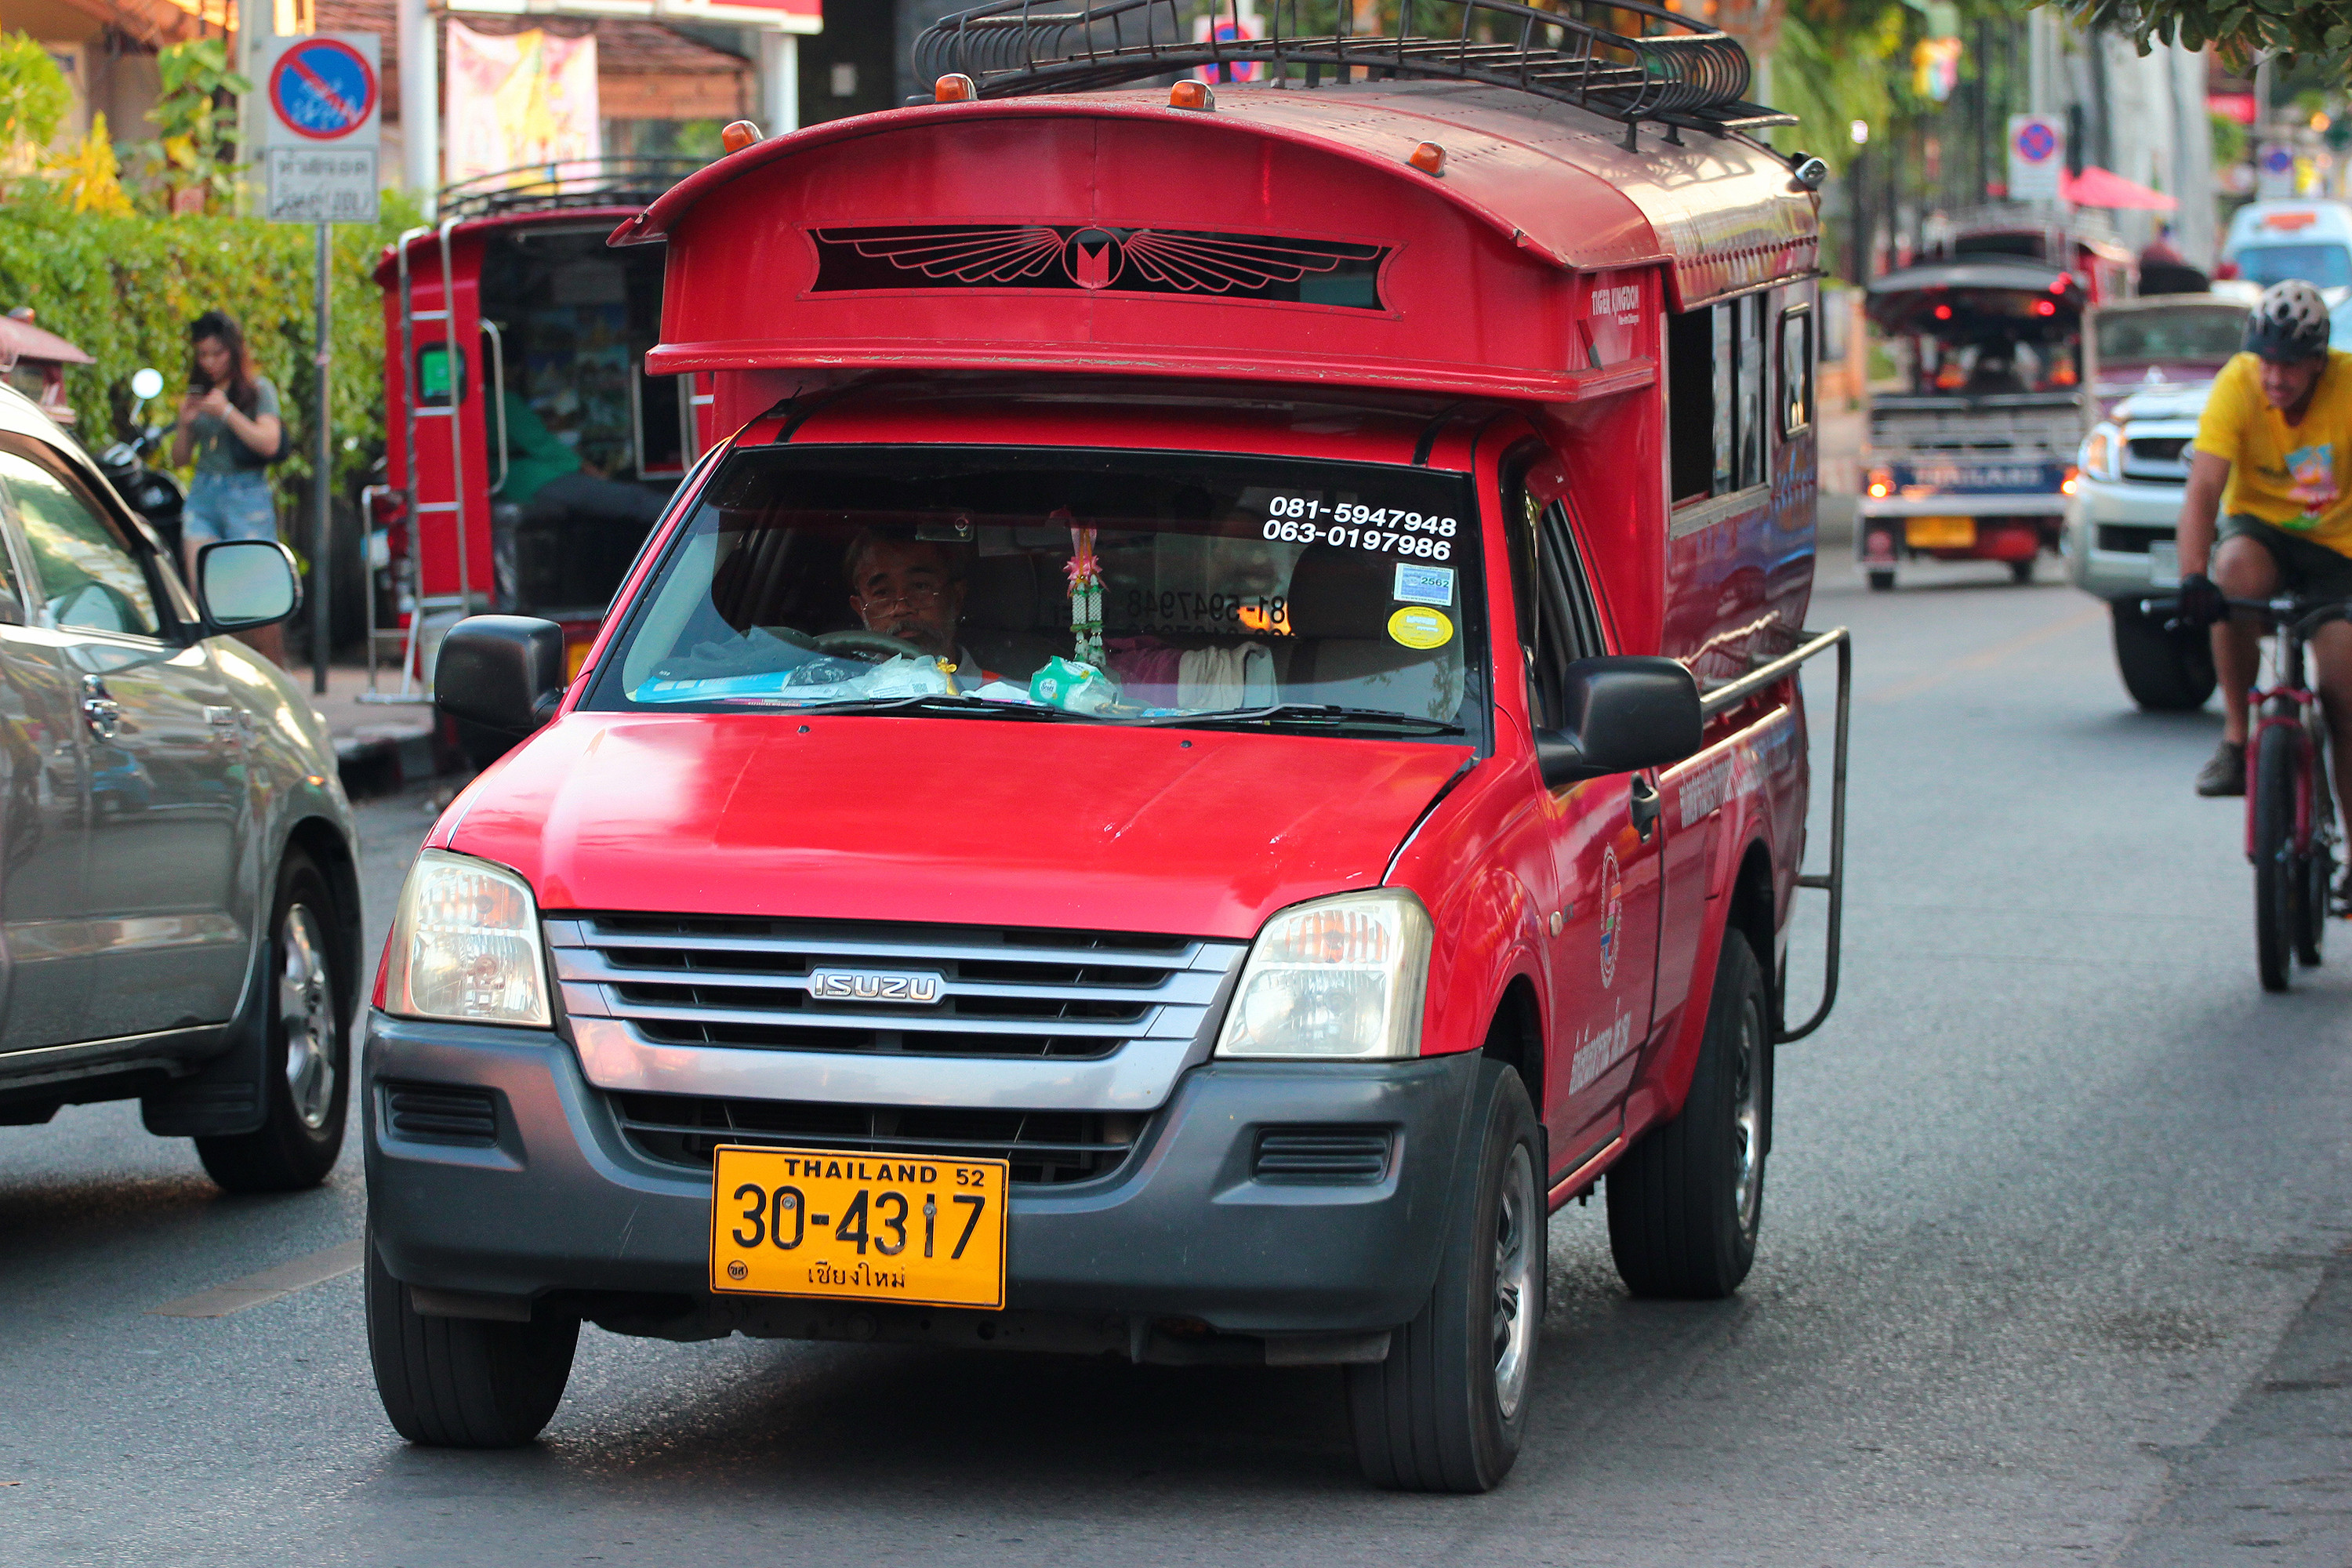 Pickup trucks, often converted to serve as “songthaew” minibuses such as this one in Chiang Mai, account for half of new vehicles sales in Thailand. Photo: Shutterstock